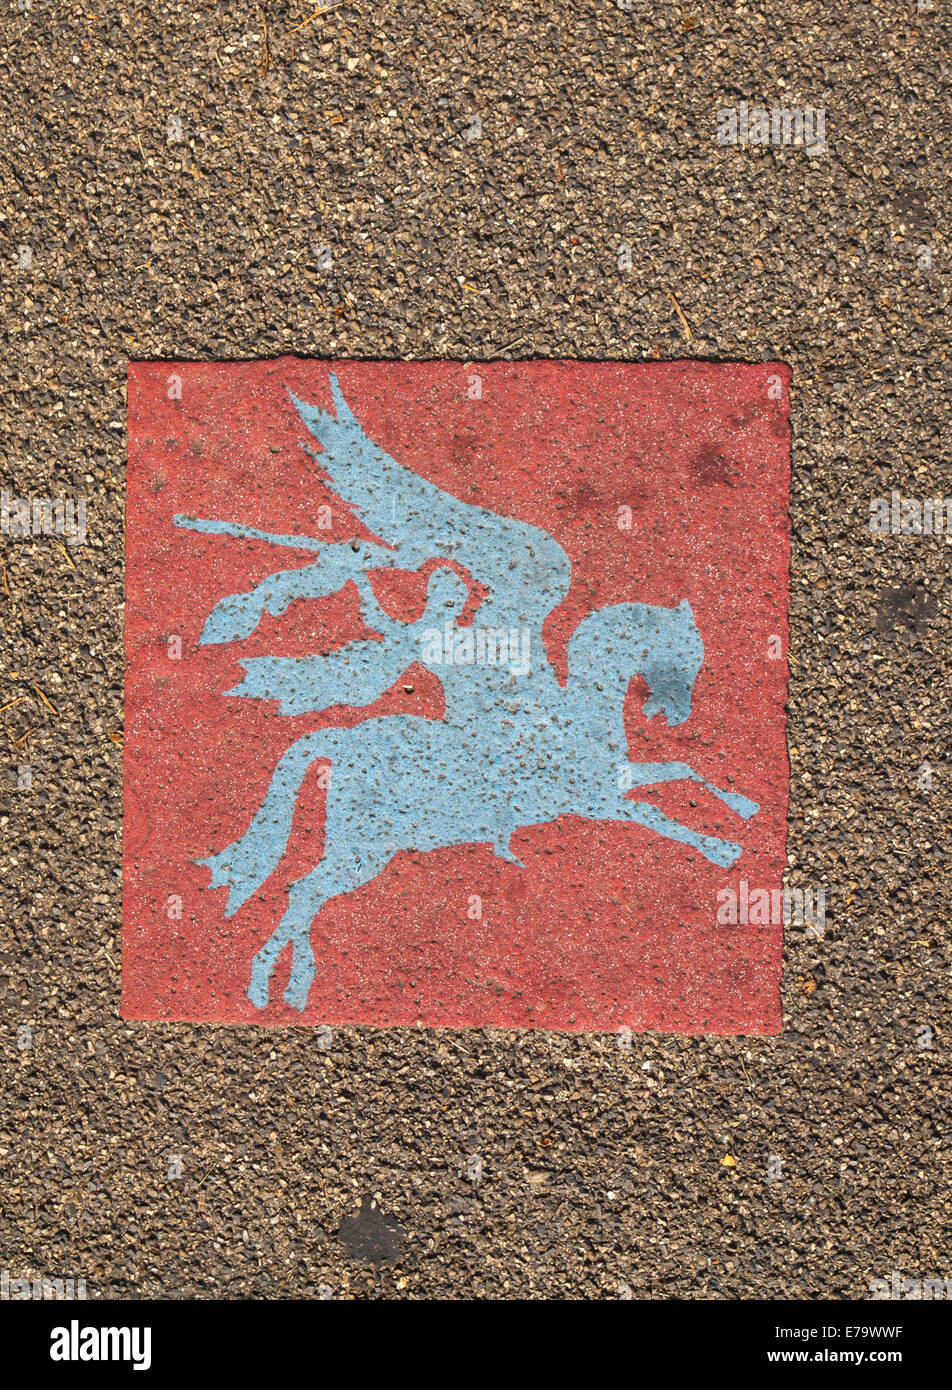 airborne regiment symbol embossed in paving stone in the town of arnhem. Stock Photo